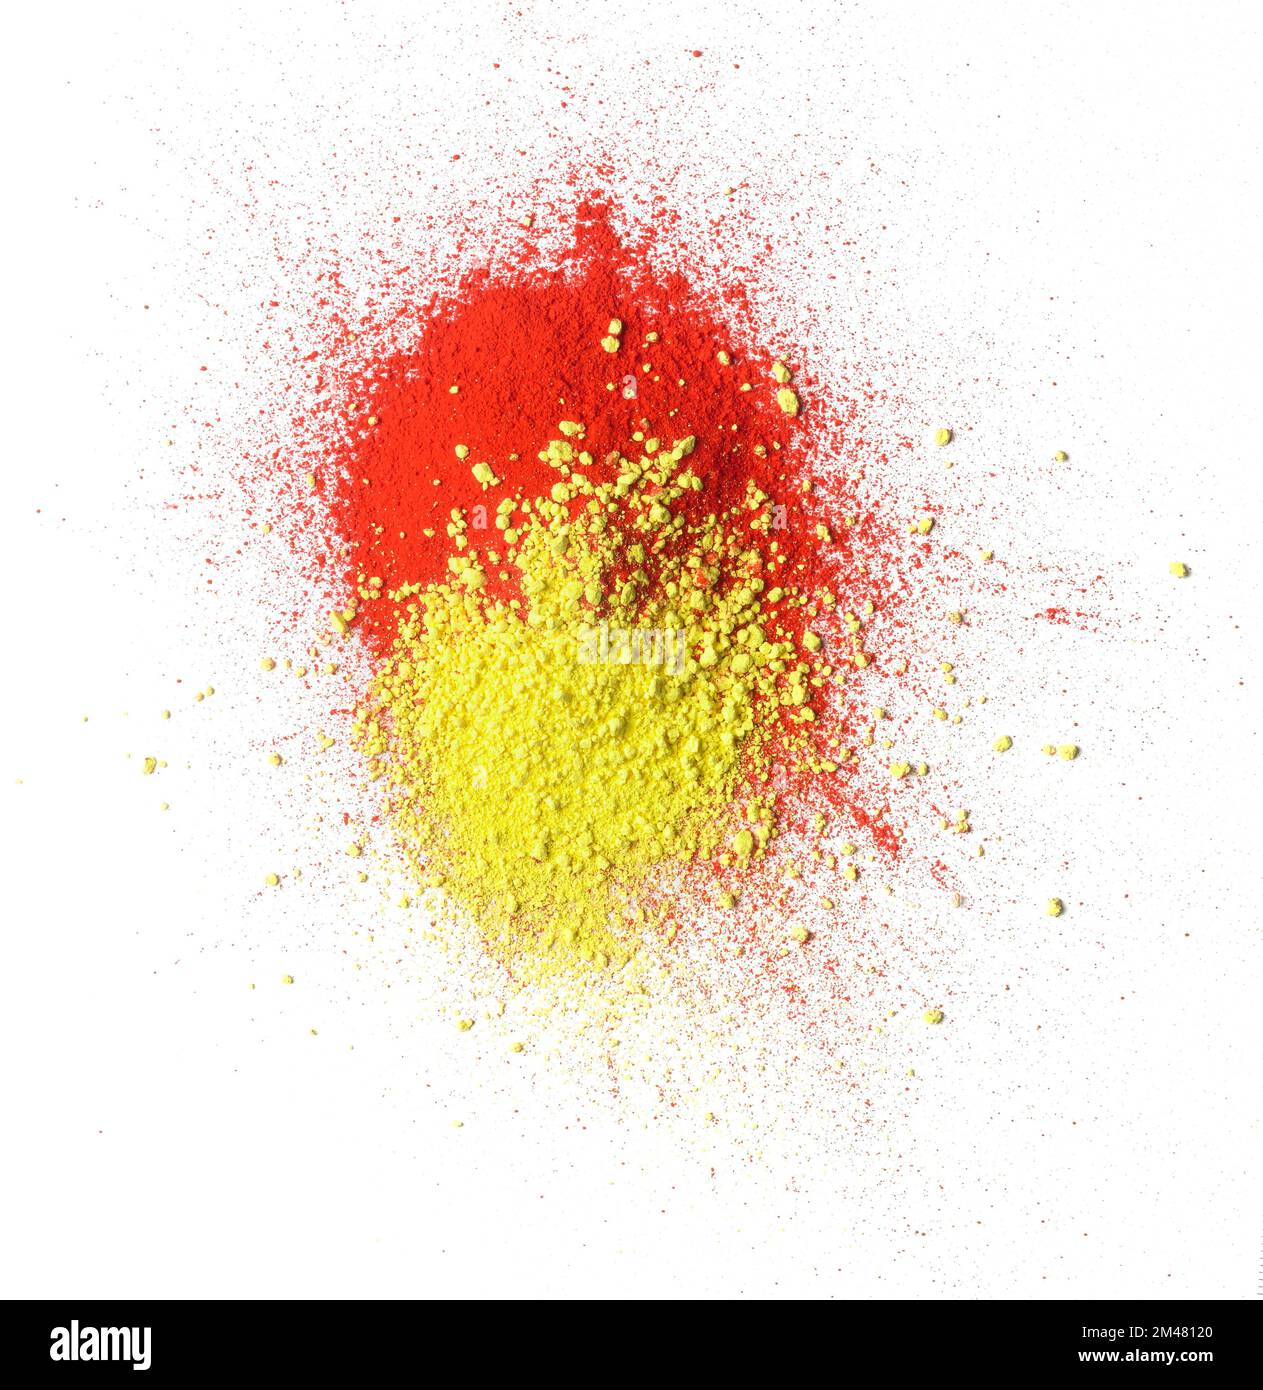 Red and yellow color powder texture against white background. Stock Photo